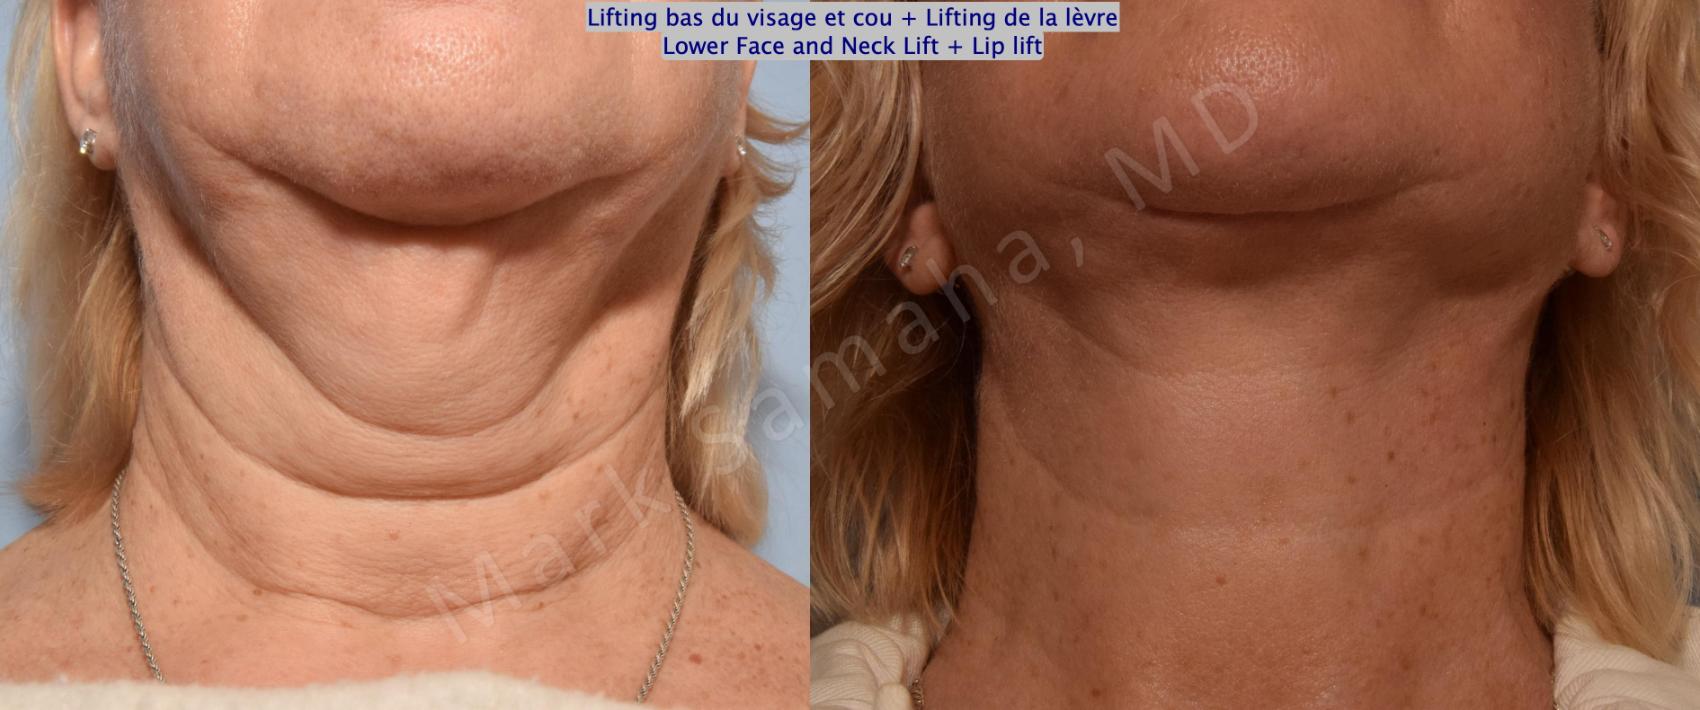 Before & After Lifting du visage / Cou - Facelift / Necklift Case 158 Neck Cou View in Montreal, QC